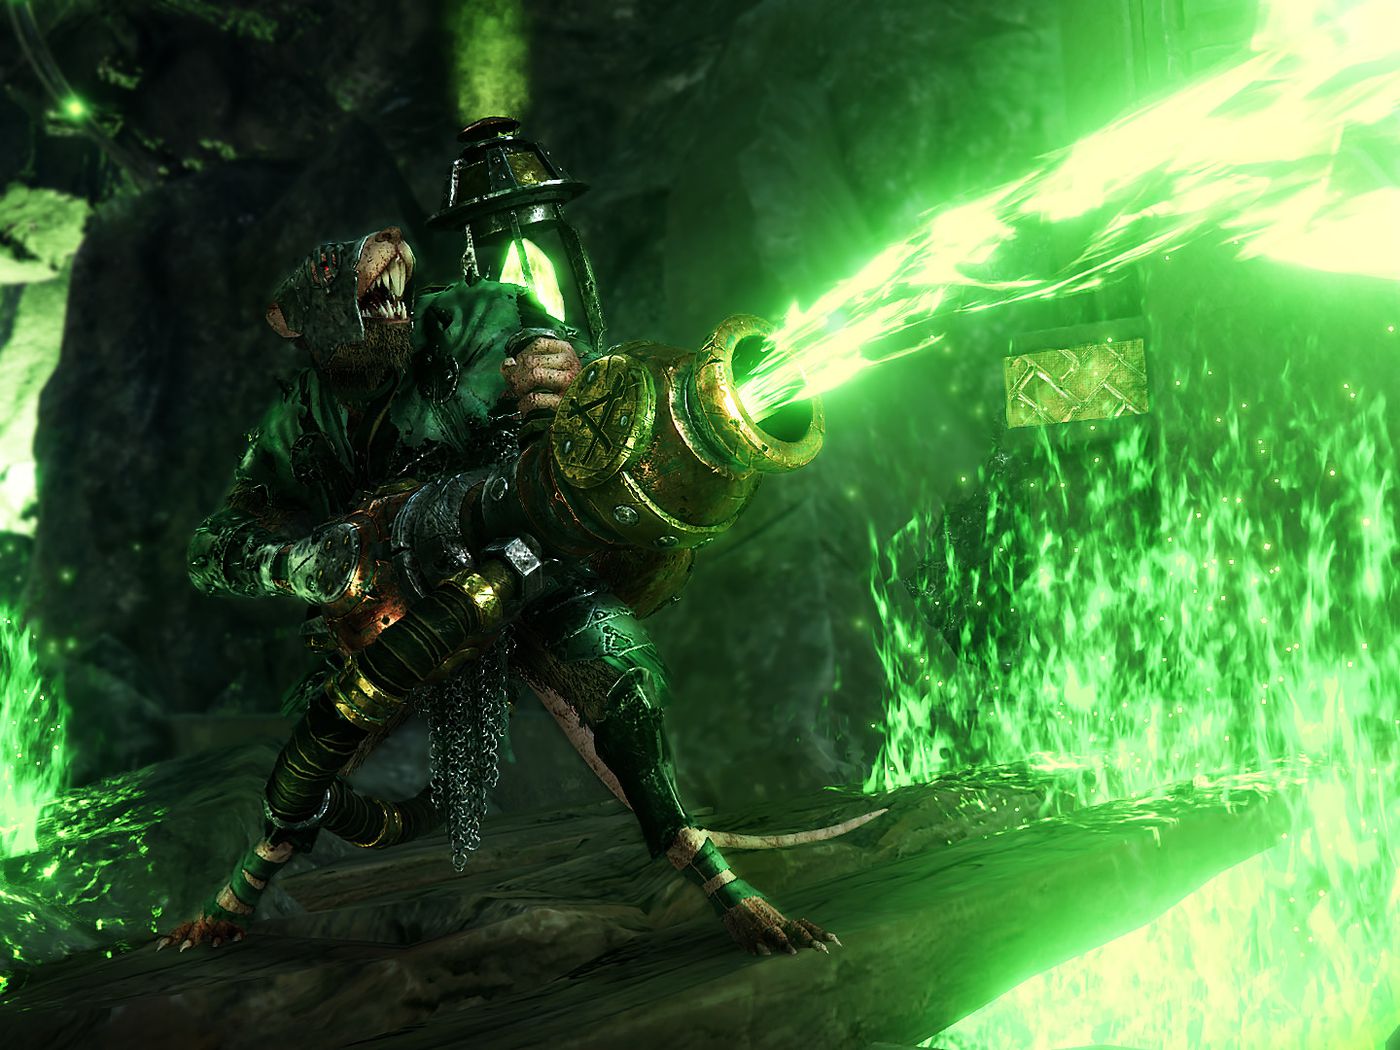 A Skaven enemy fires off flames in Warhammer: Vermintide 2